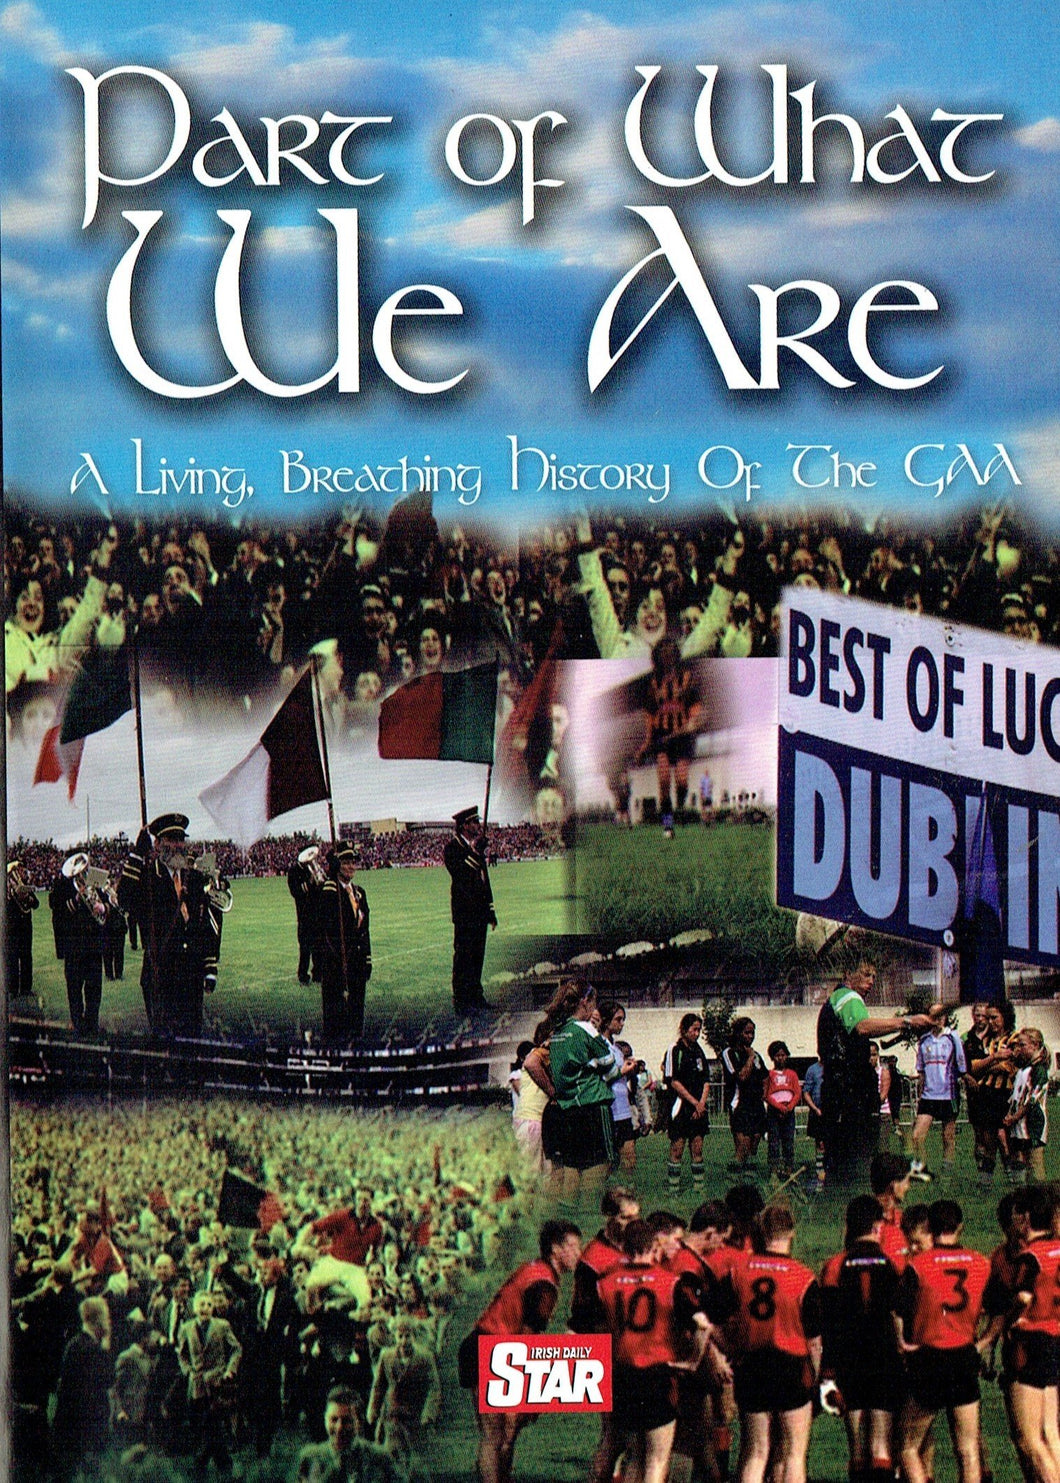 Part of what we are. A living breathing history of the Gaa DVD